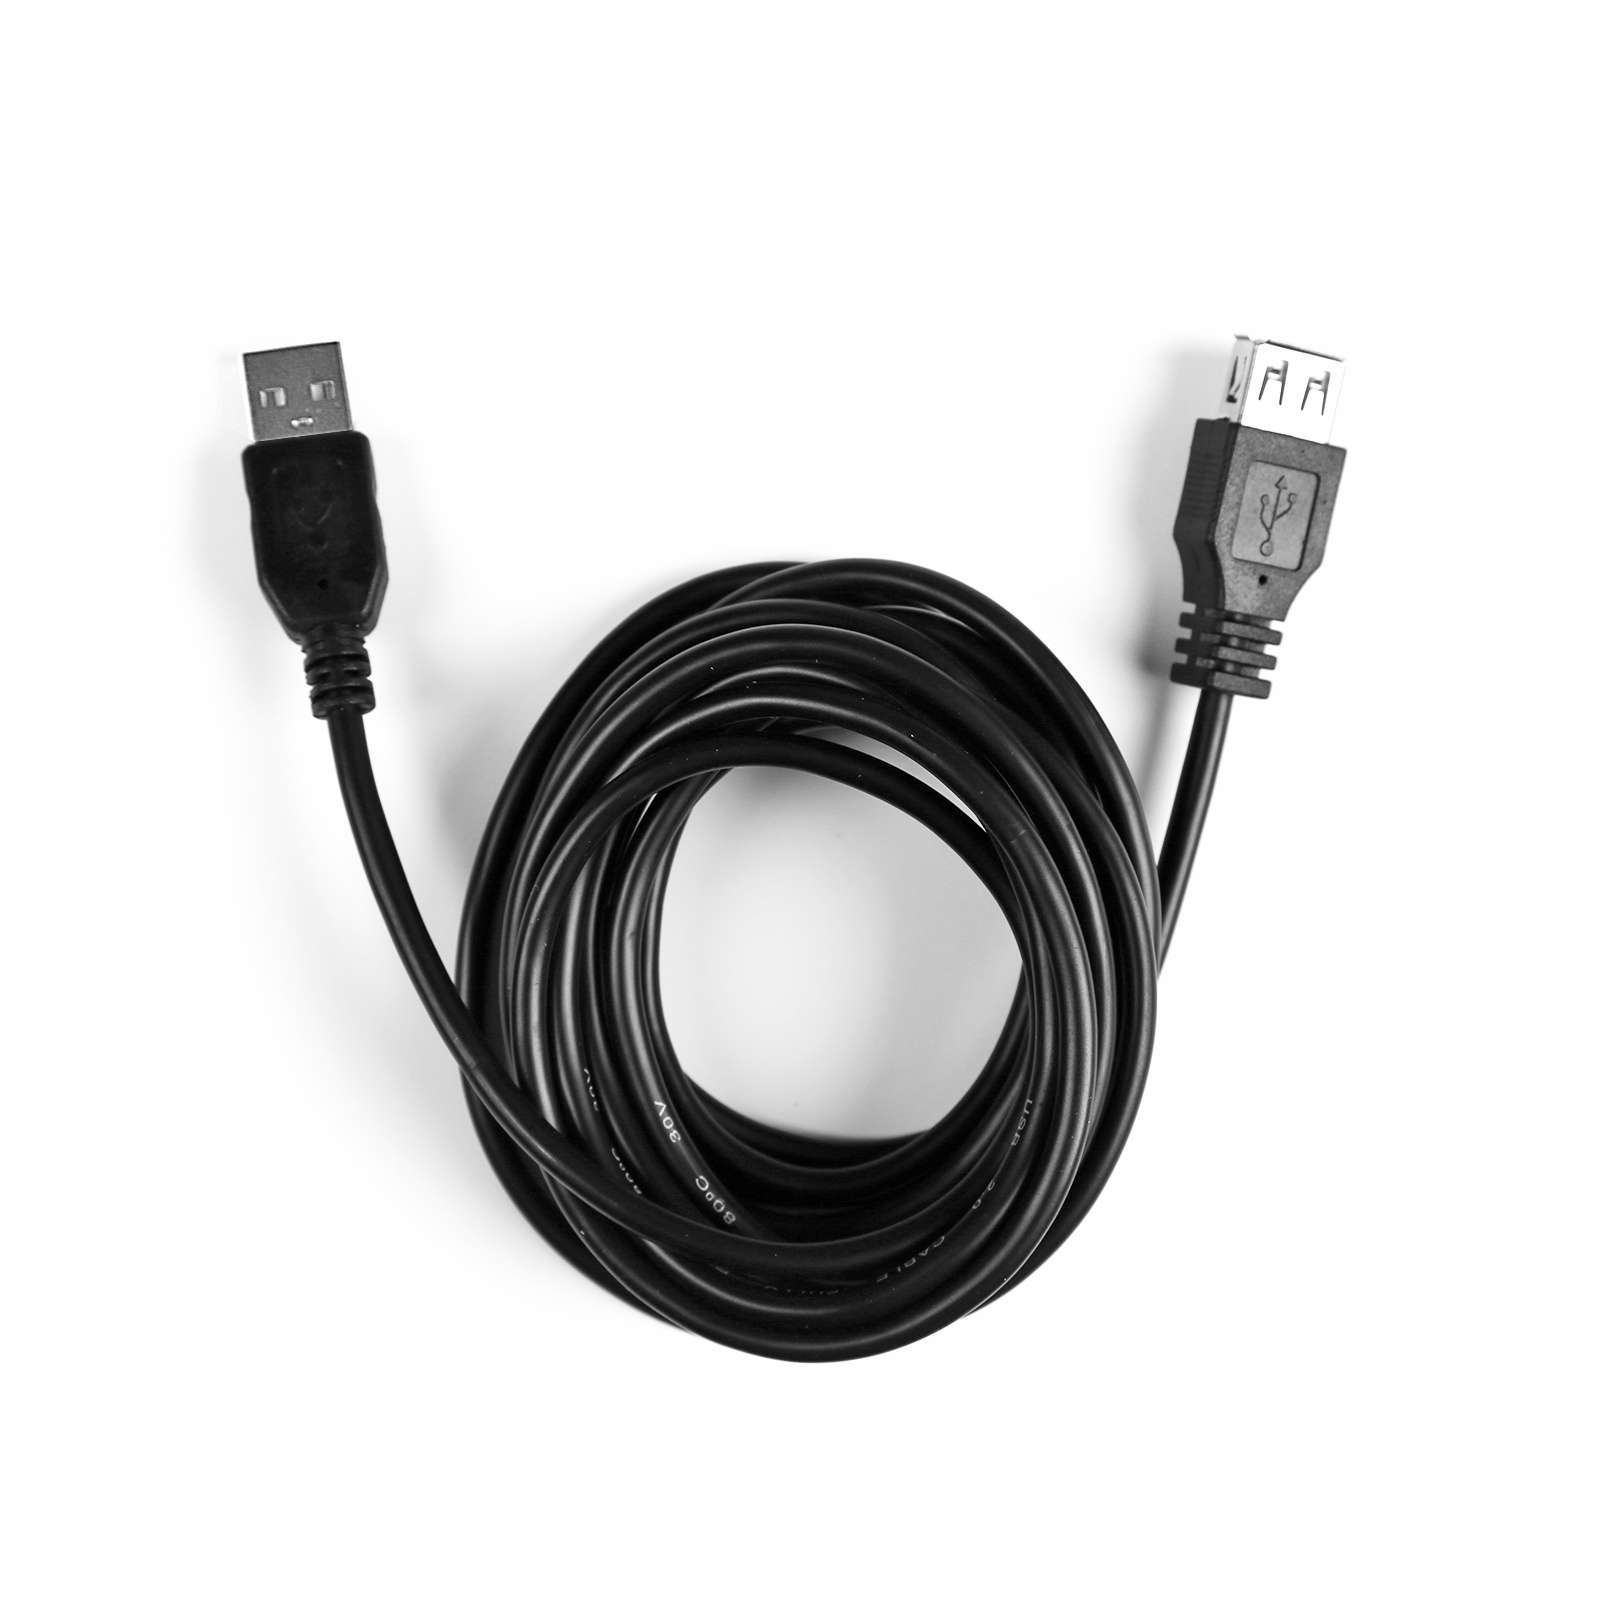 EKON USB cable 2.0 type A male to type B male length 3 m. nickel plated connector